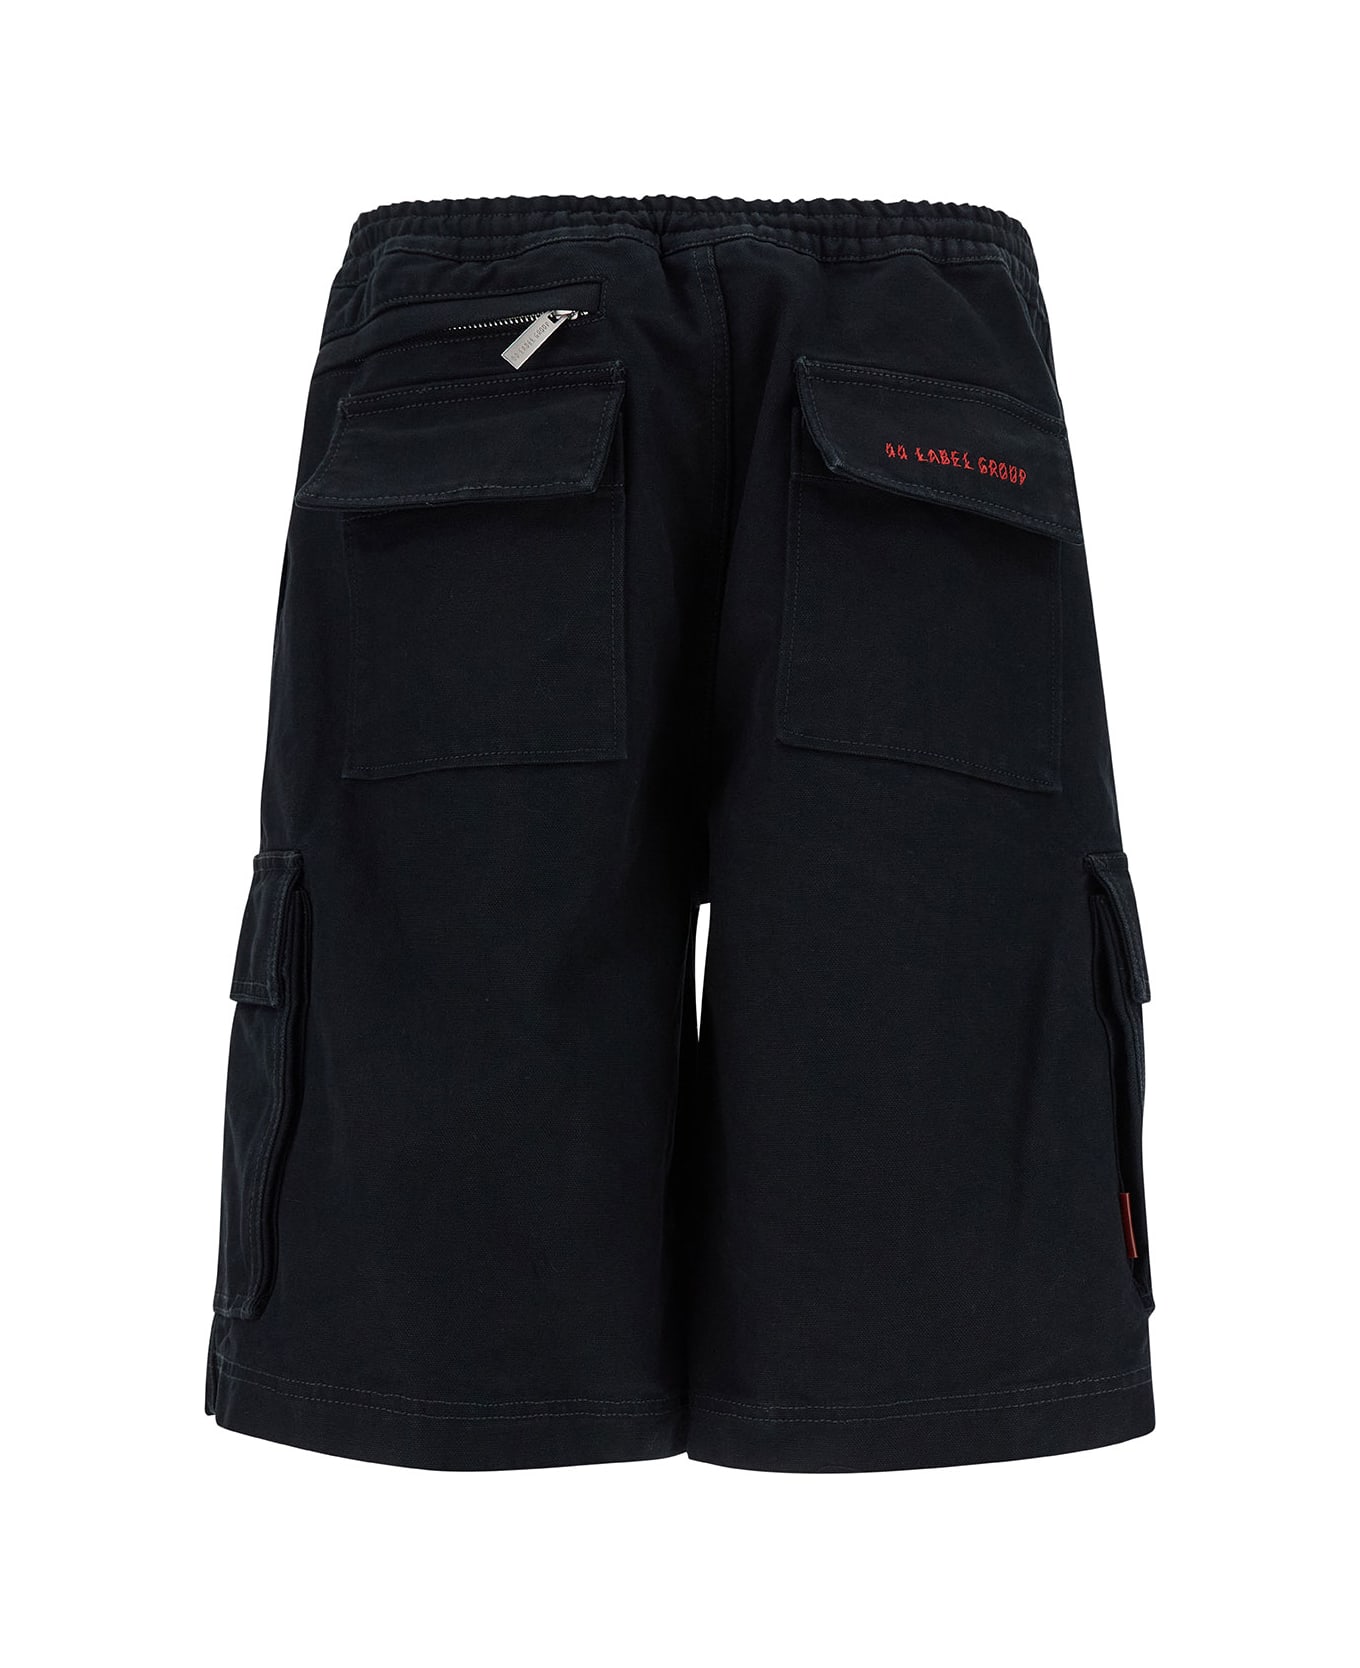 44 Label Group Black Cargo Bermuda Shorts With Logo Embroidery In Cotton Man - Black